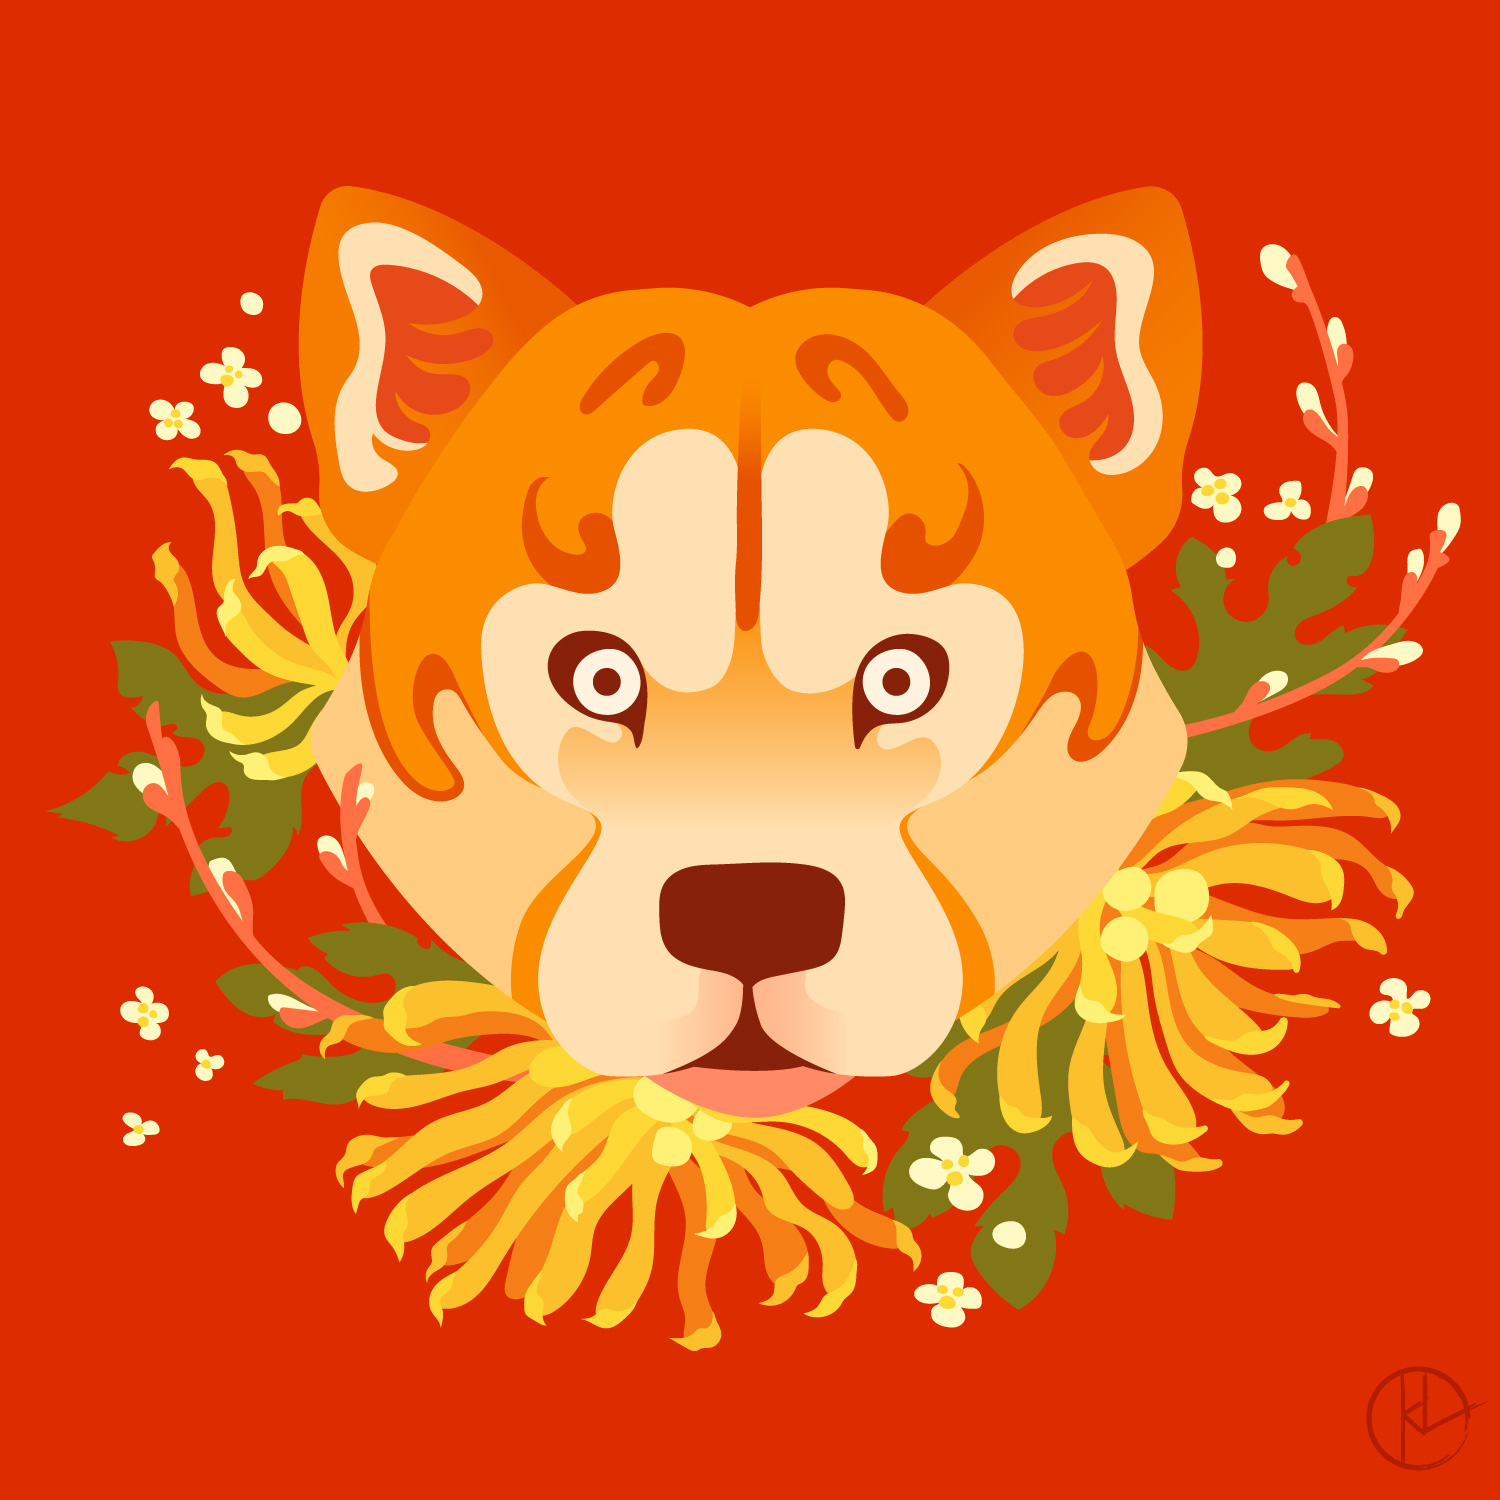 Shiba Inu illustration for Year of the Dog show